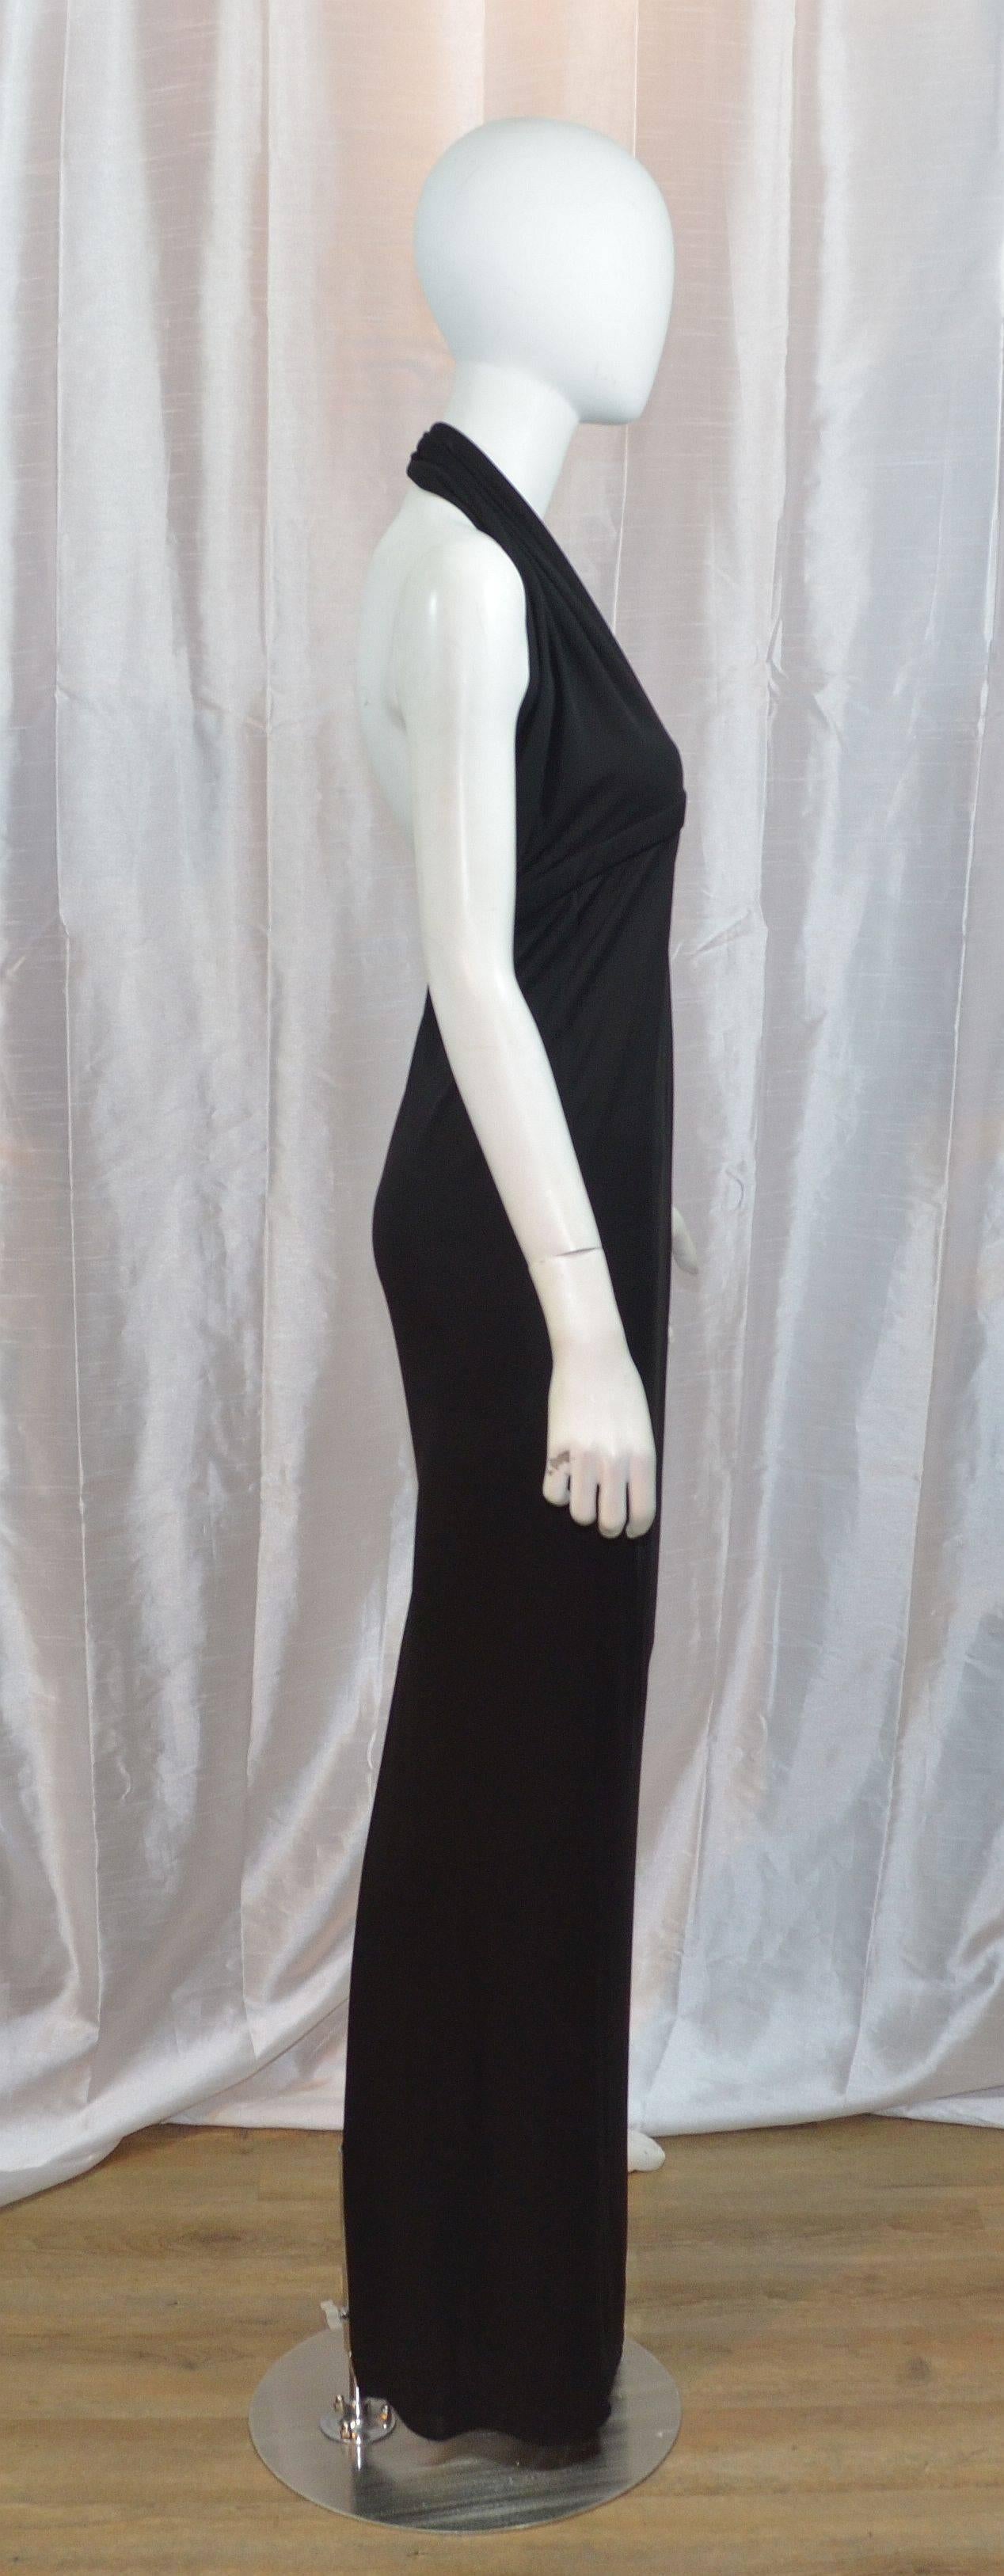 Gucci Black Jersey Dress Halter Neck Maxi Gown

Gucci halter gown is made with 100% rayon jersey fabric, made in Italy. Dress is labeled a size L but fits smaller so please see measurements. Back zipper and hook-and-eye fastening. Dress also